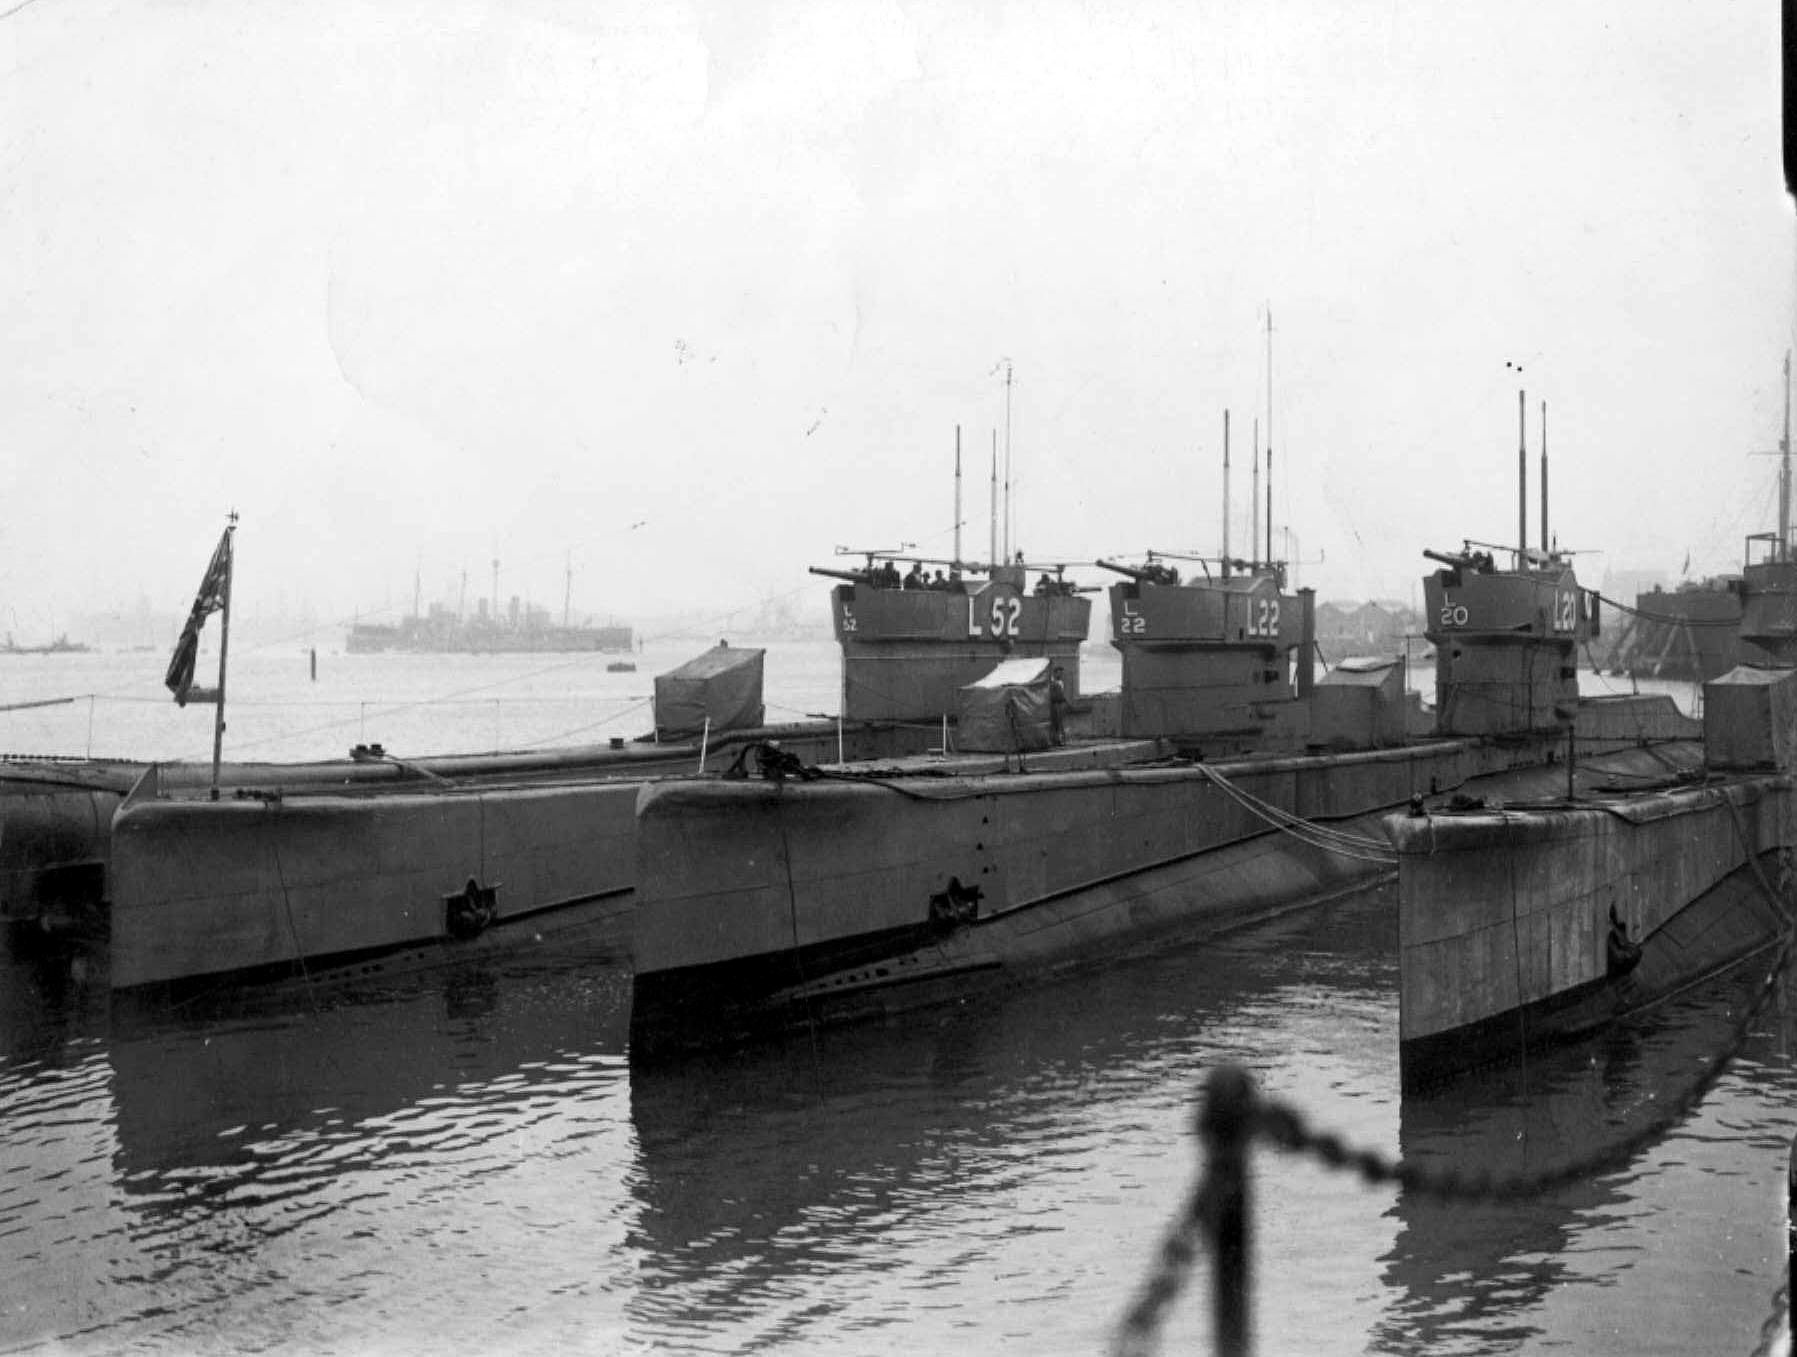 By Terry Whalebone - originally posted to Flickr as L-Class Submarine Flotilla 1933 at Gosport, CC BY 2.0